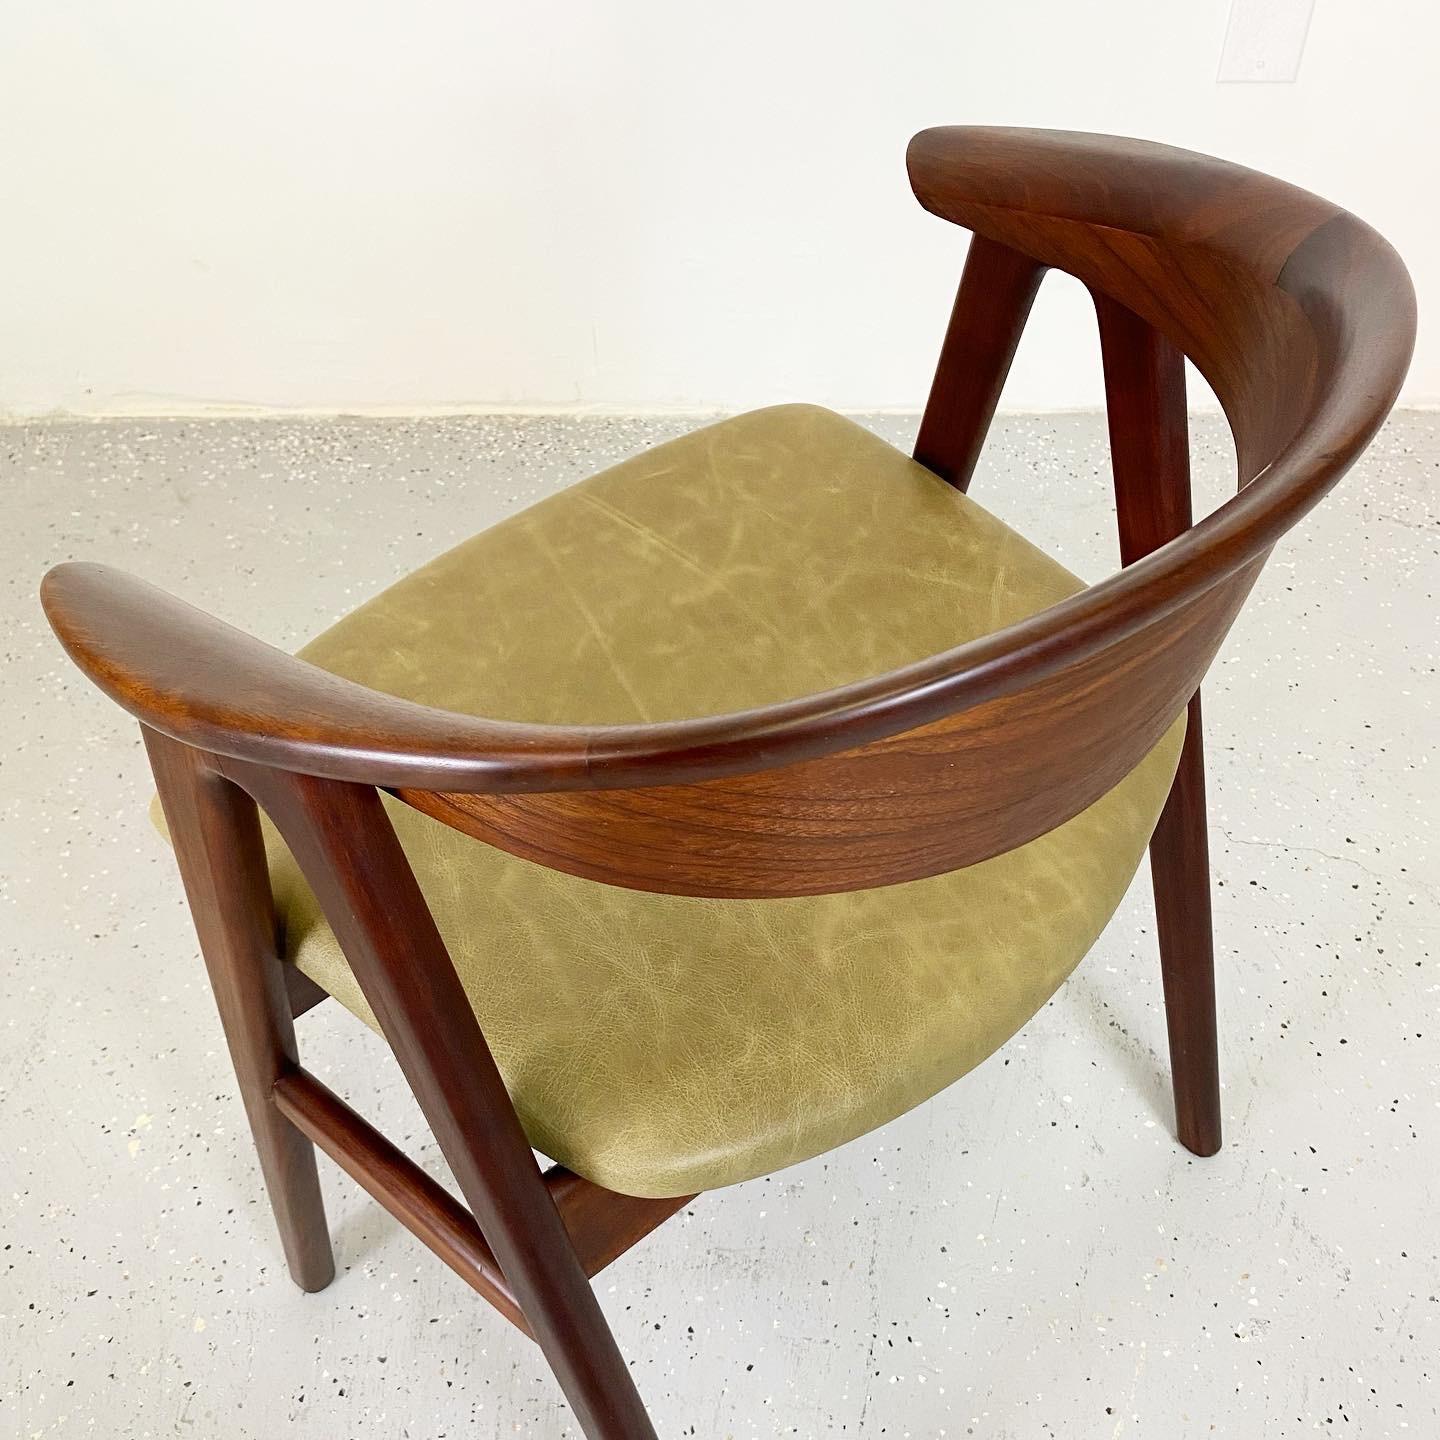 Erik Kirkegaard designed this model 52 armchair for Høng Stolefabrik in 1952.
These chairs have been recently oiled and upholstered with new leather. The frames are sturdy and the walnut shows a beautiful rich tone.